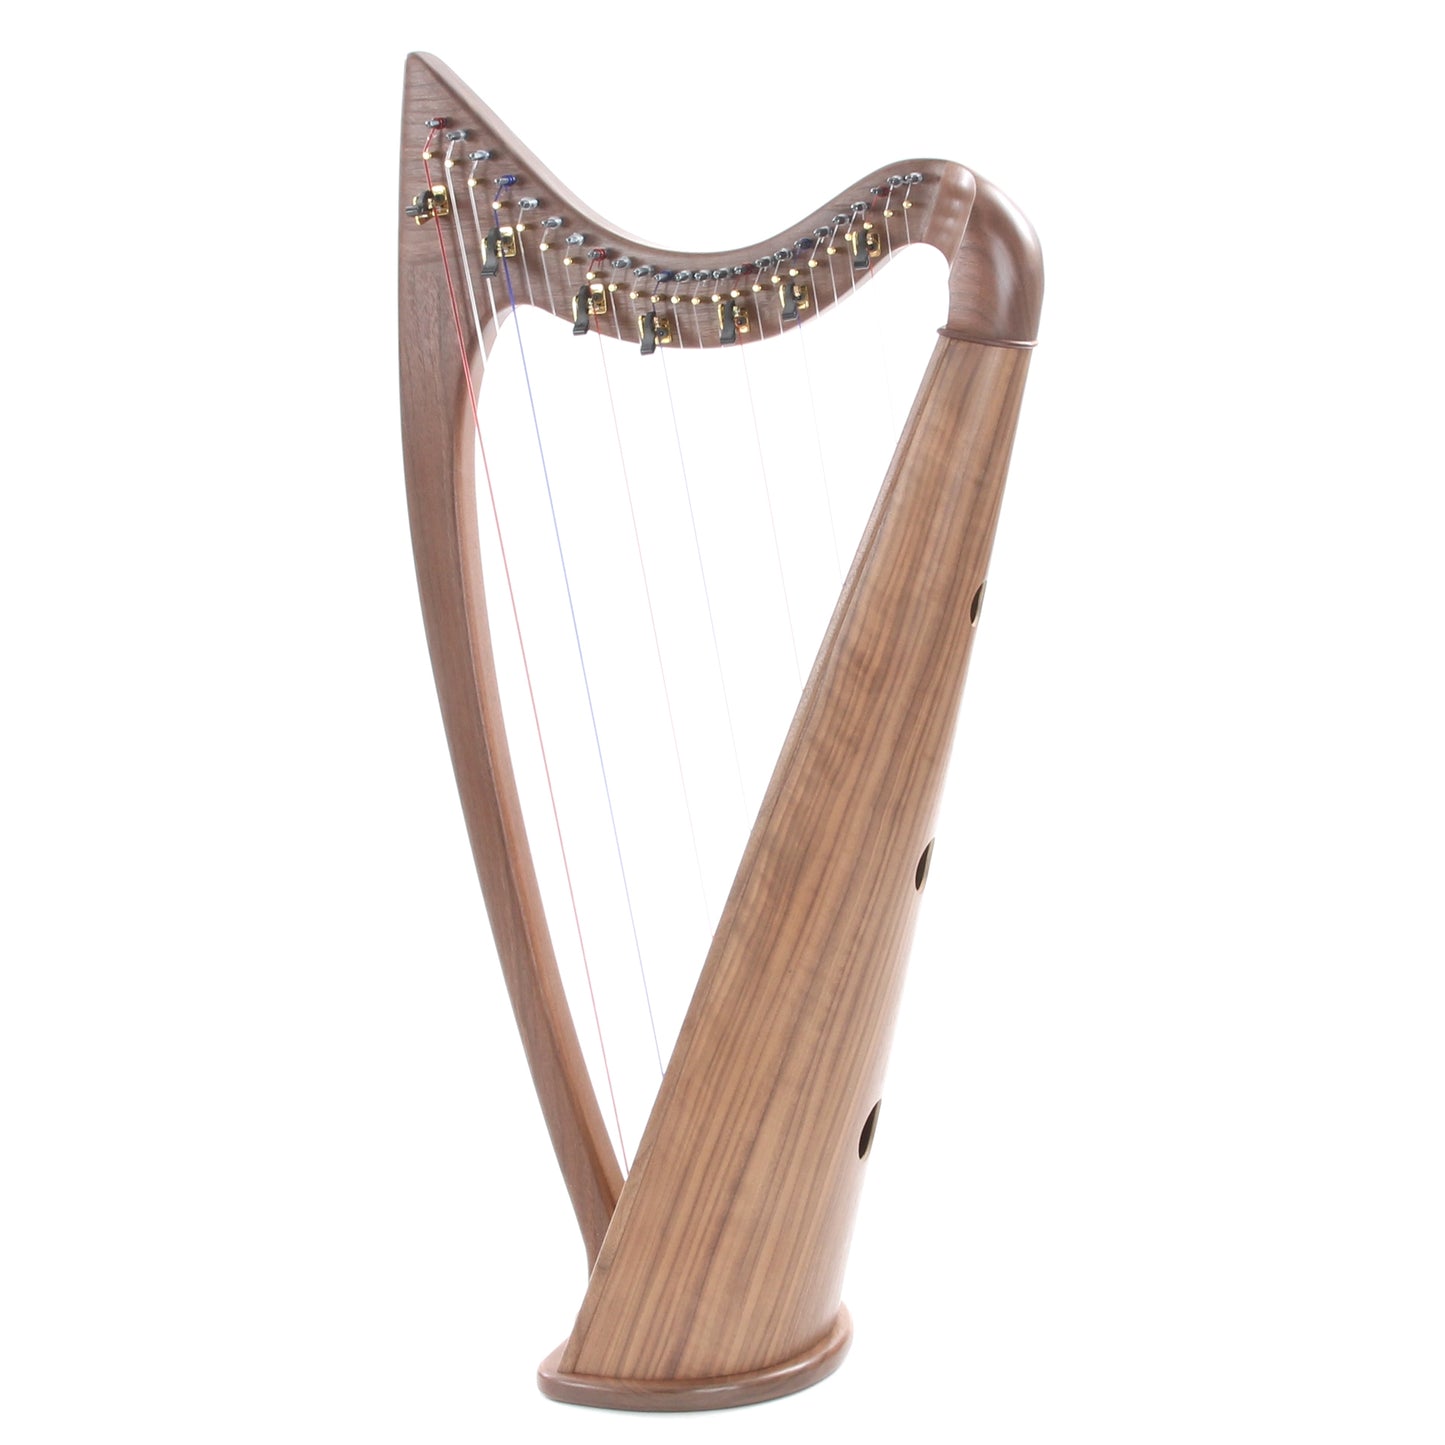 Image 1 of Noteworthy County Kerry 24-String Walnut Harp & Bag - SKU# GH24-WAL : Product Type Harps & Psalteries : Elderly Instruments